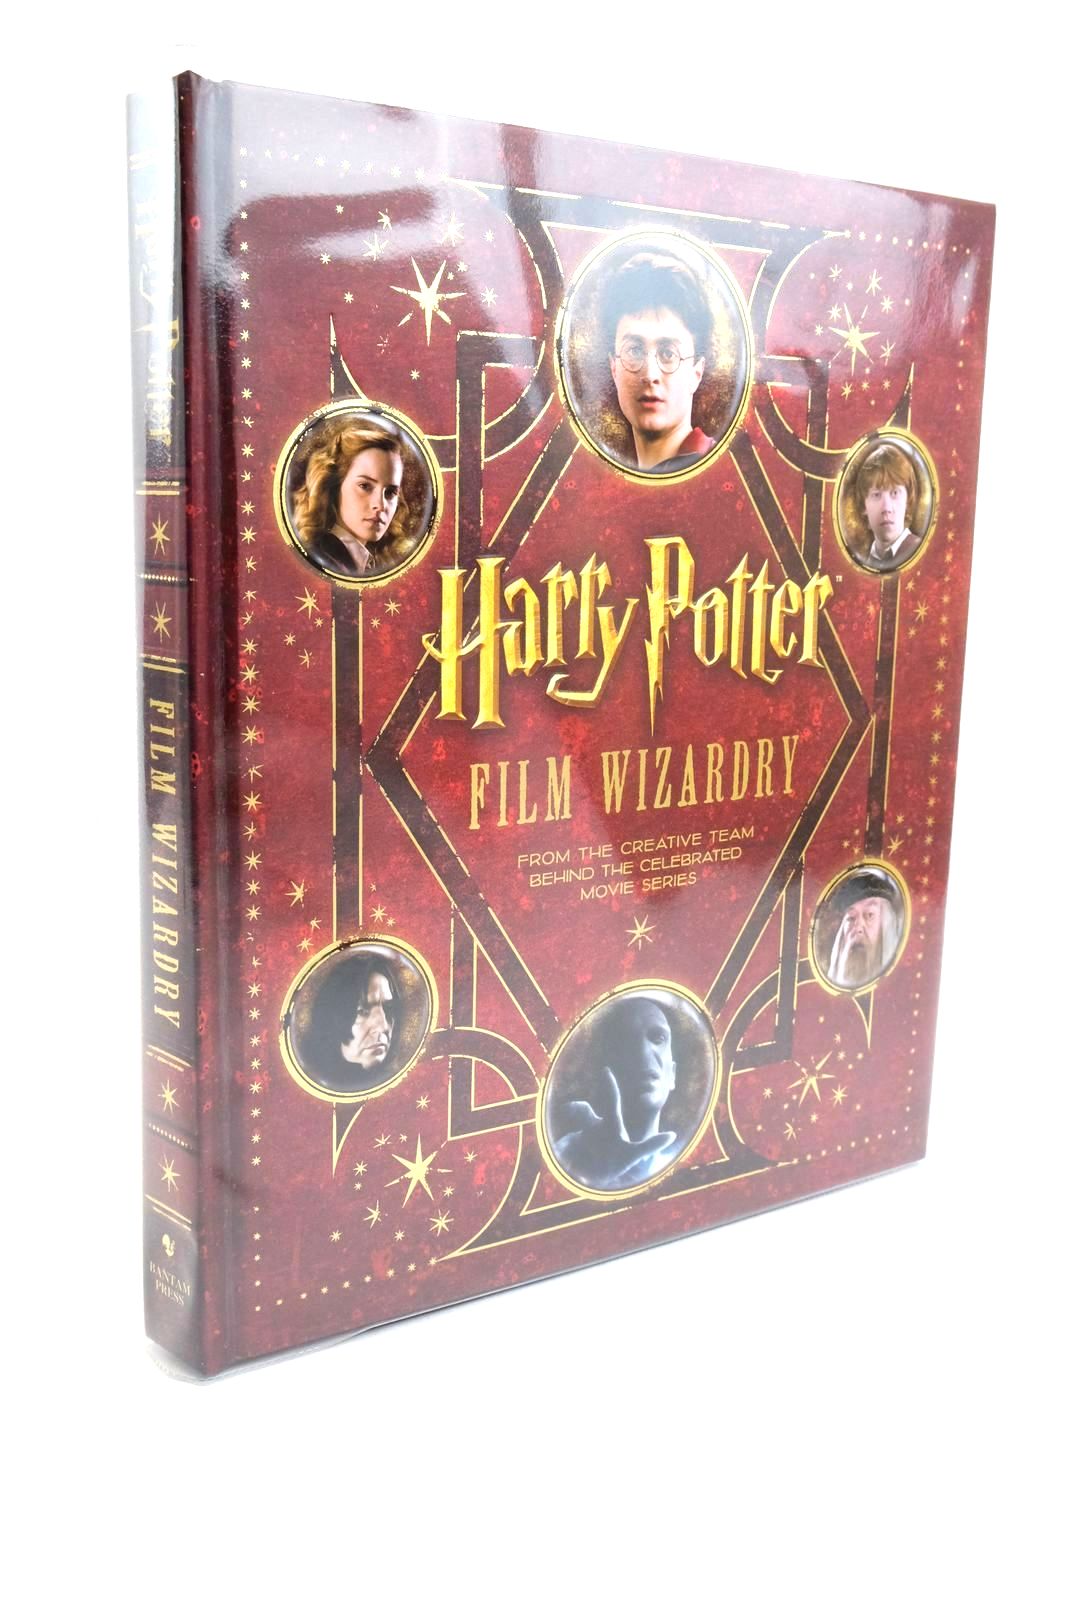 Photo of HARRY POTTER FILM WIZARDRY- Stock Number: 1322288